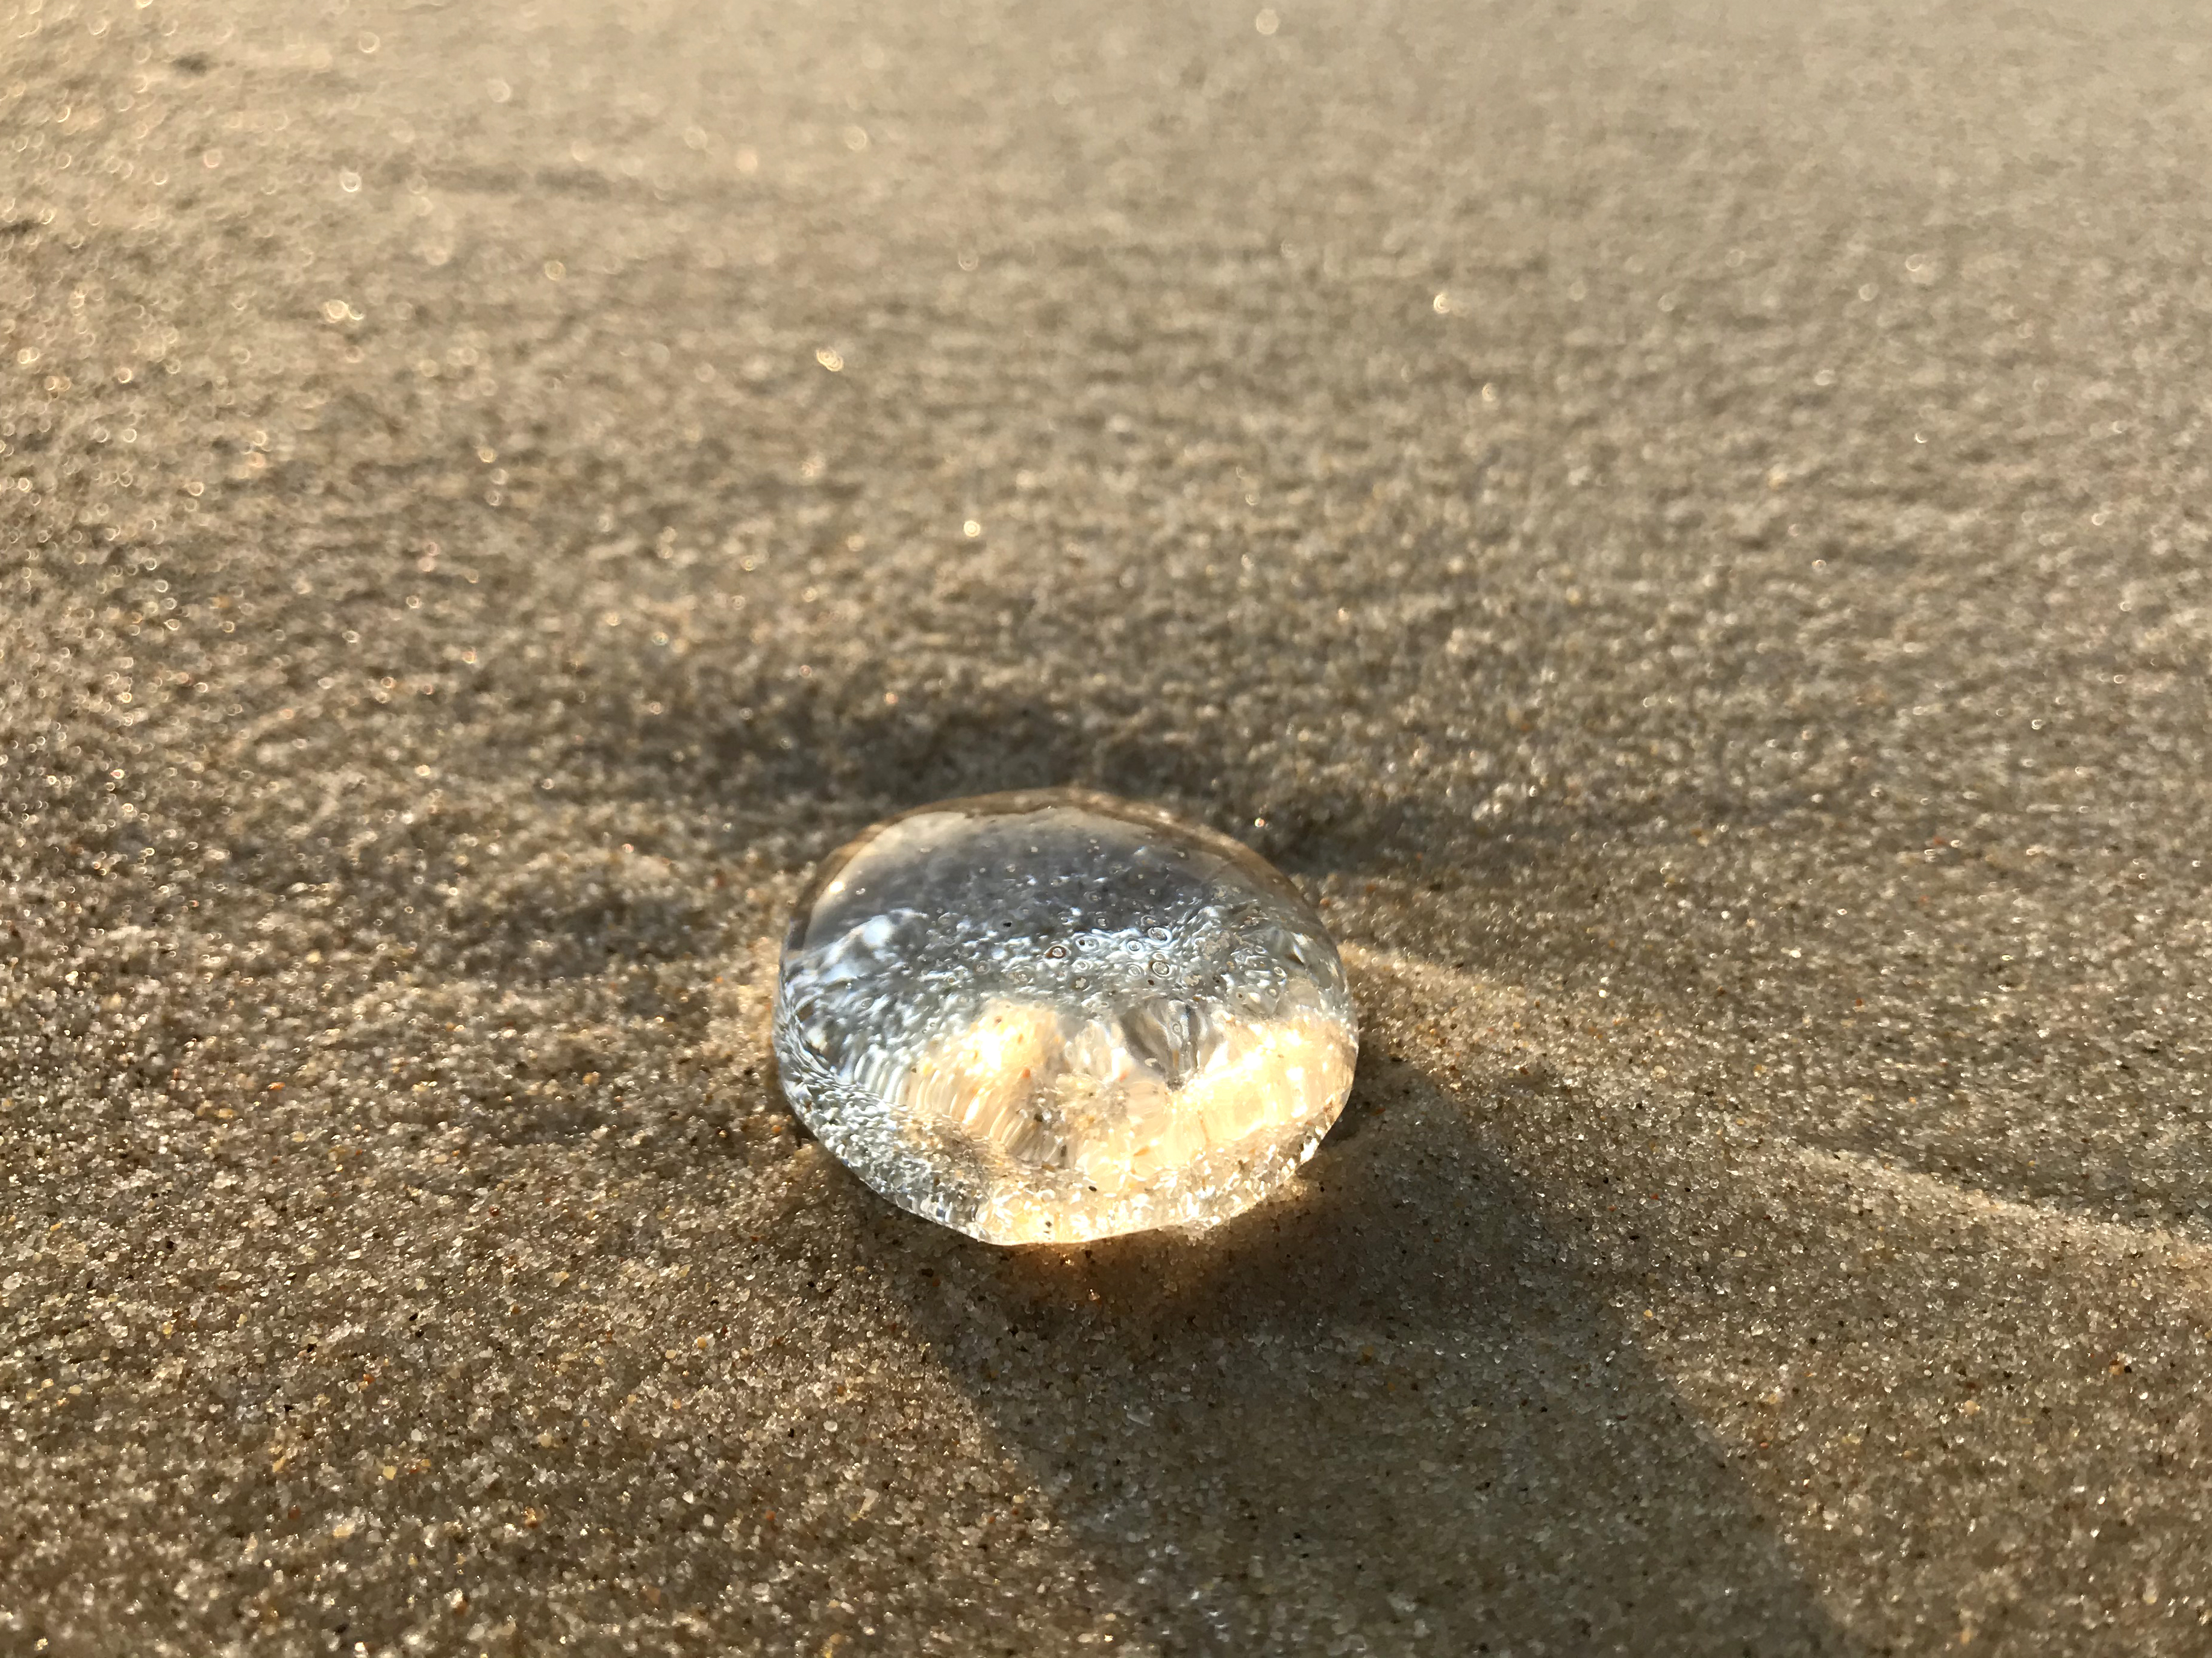 A moon jelly washed up on the shore